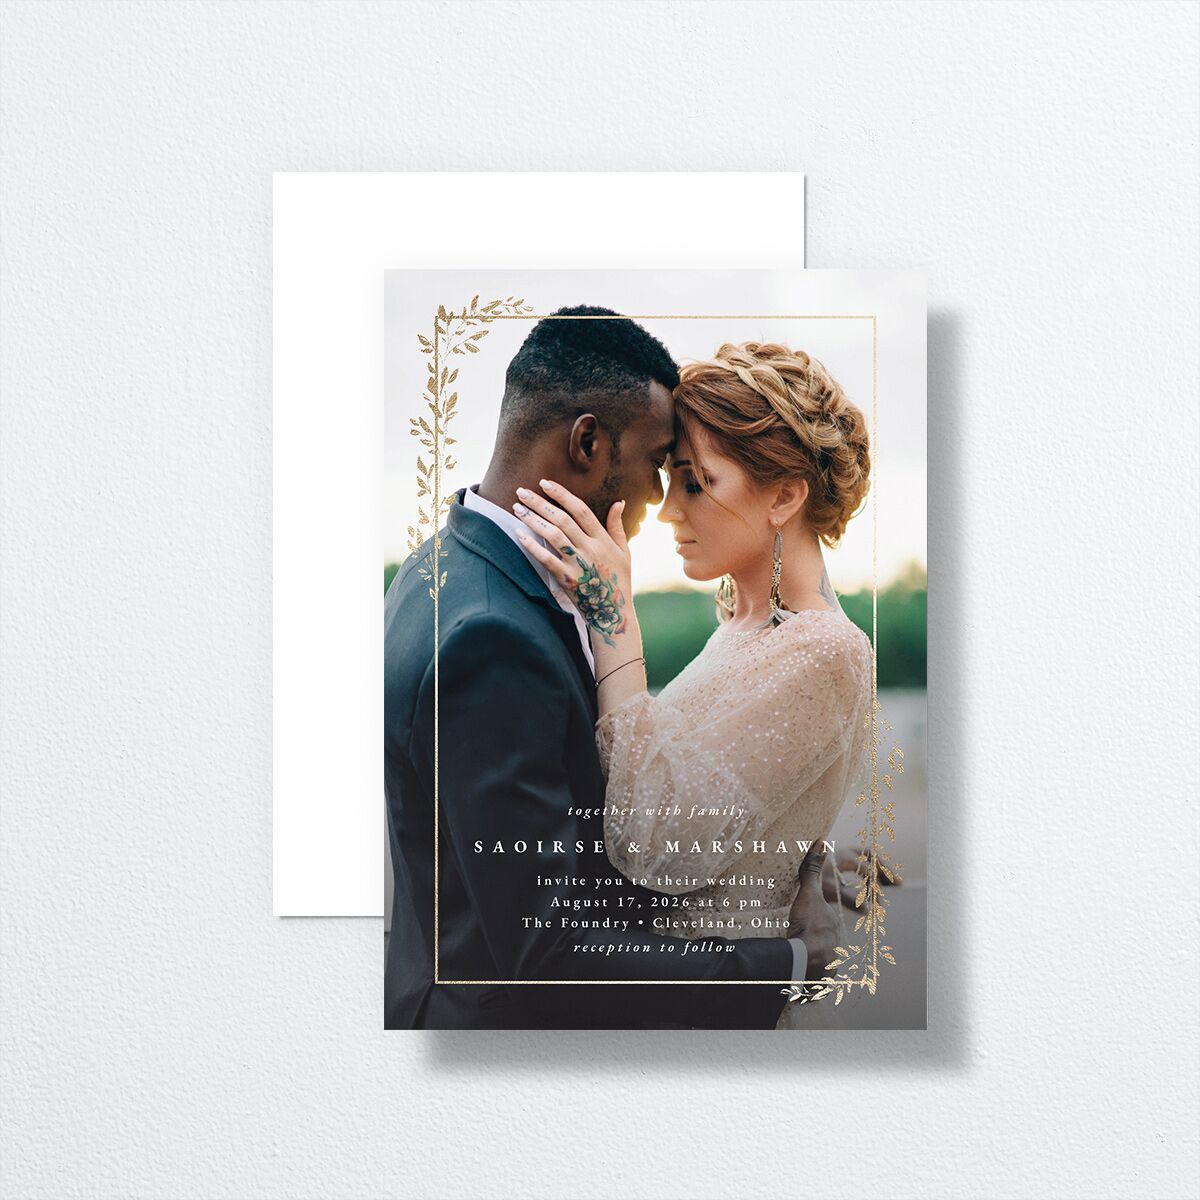 Delicate Frame Wedding Invitations front-and-back in white